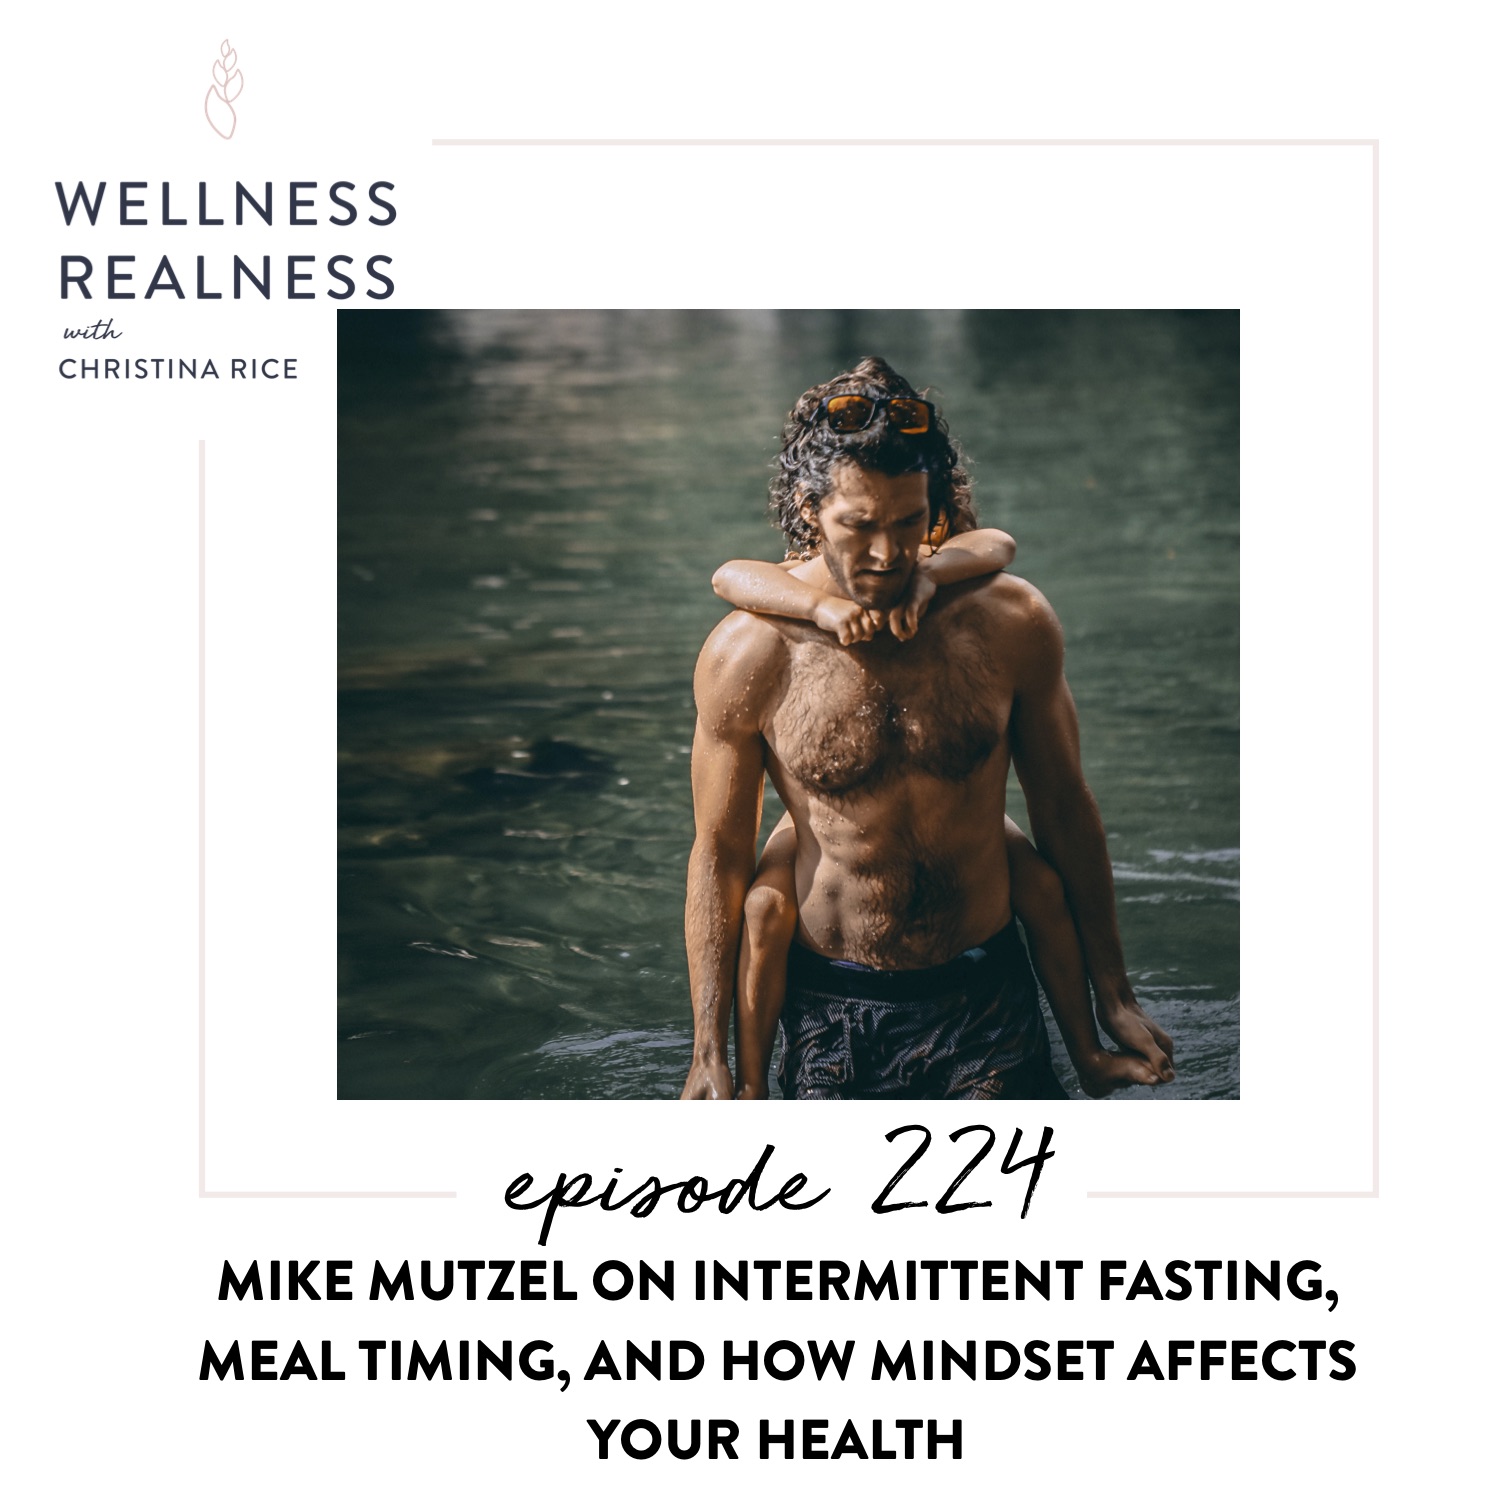 224: Mike Mutzel on Intermittent Fasting, Meal Timing, and How Mindset Affects Your Health